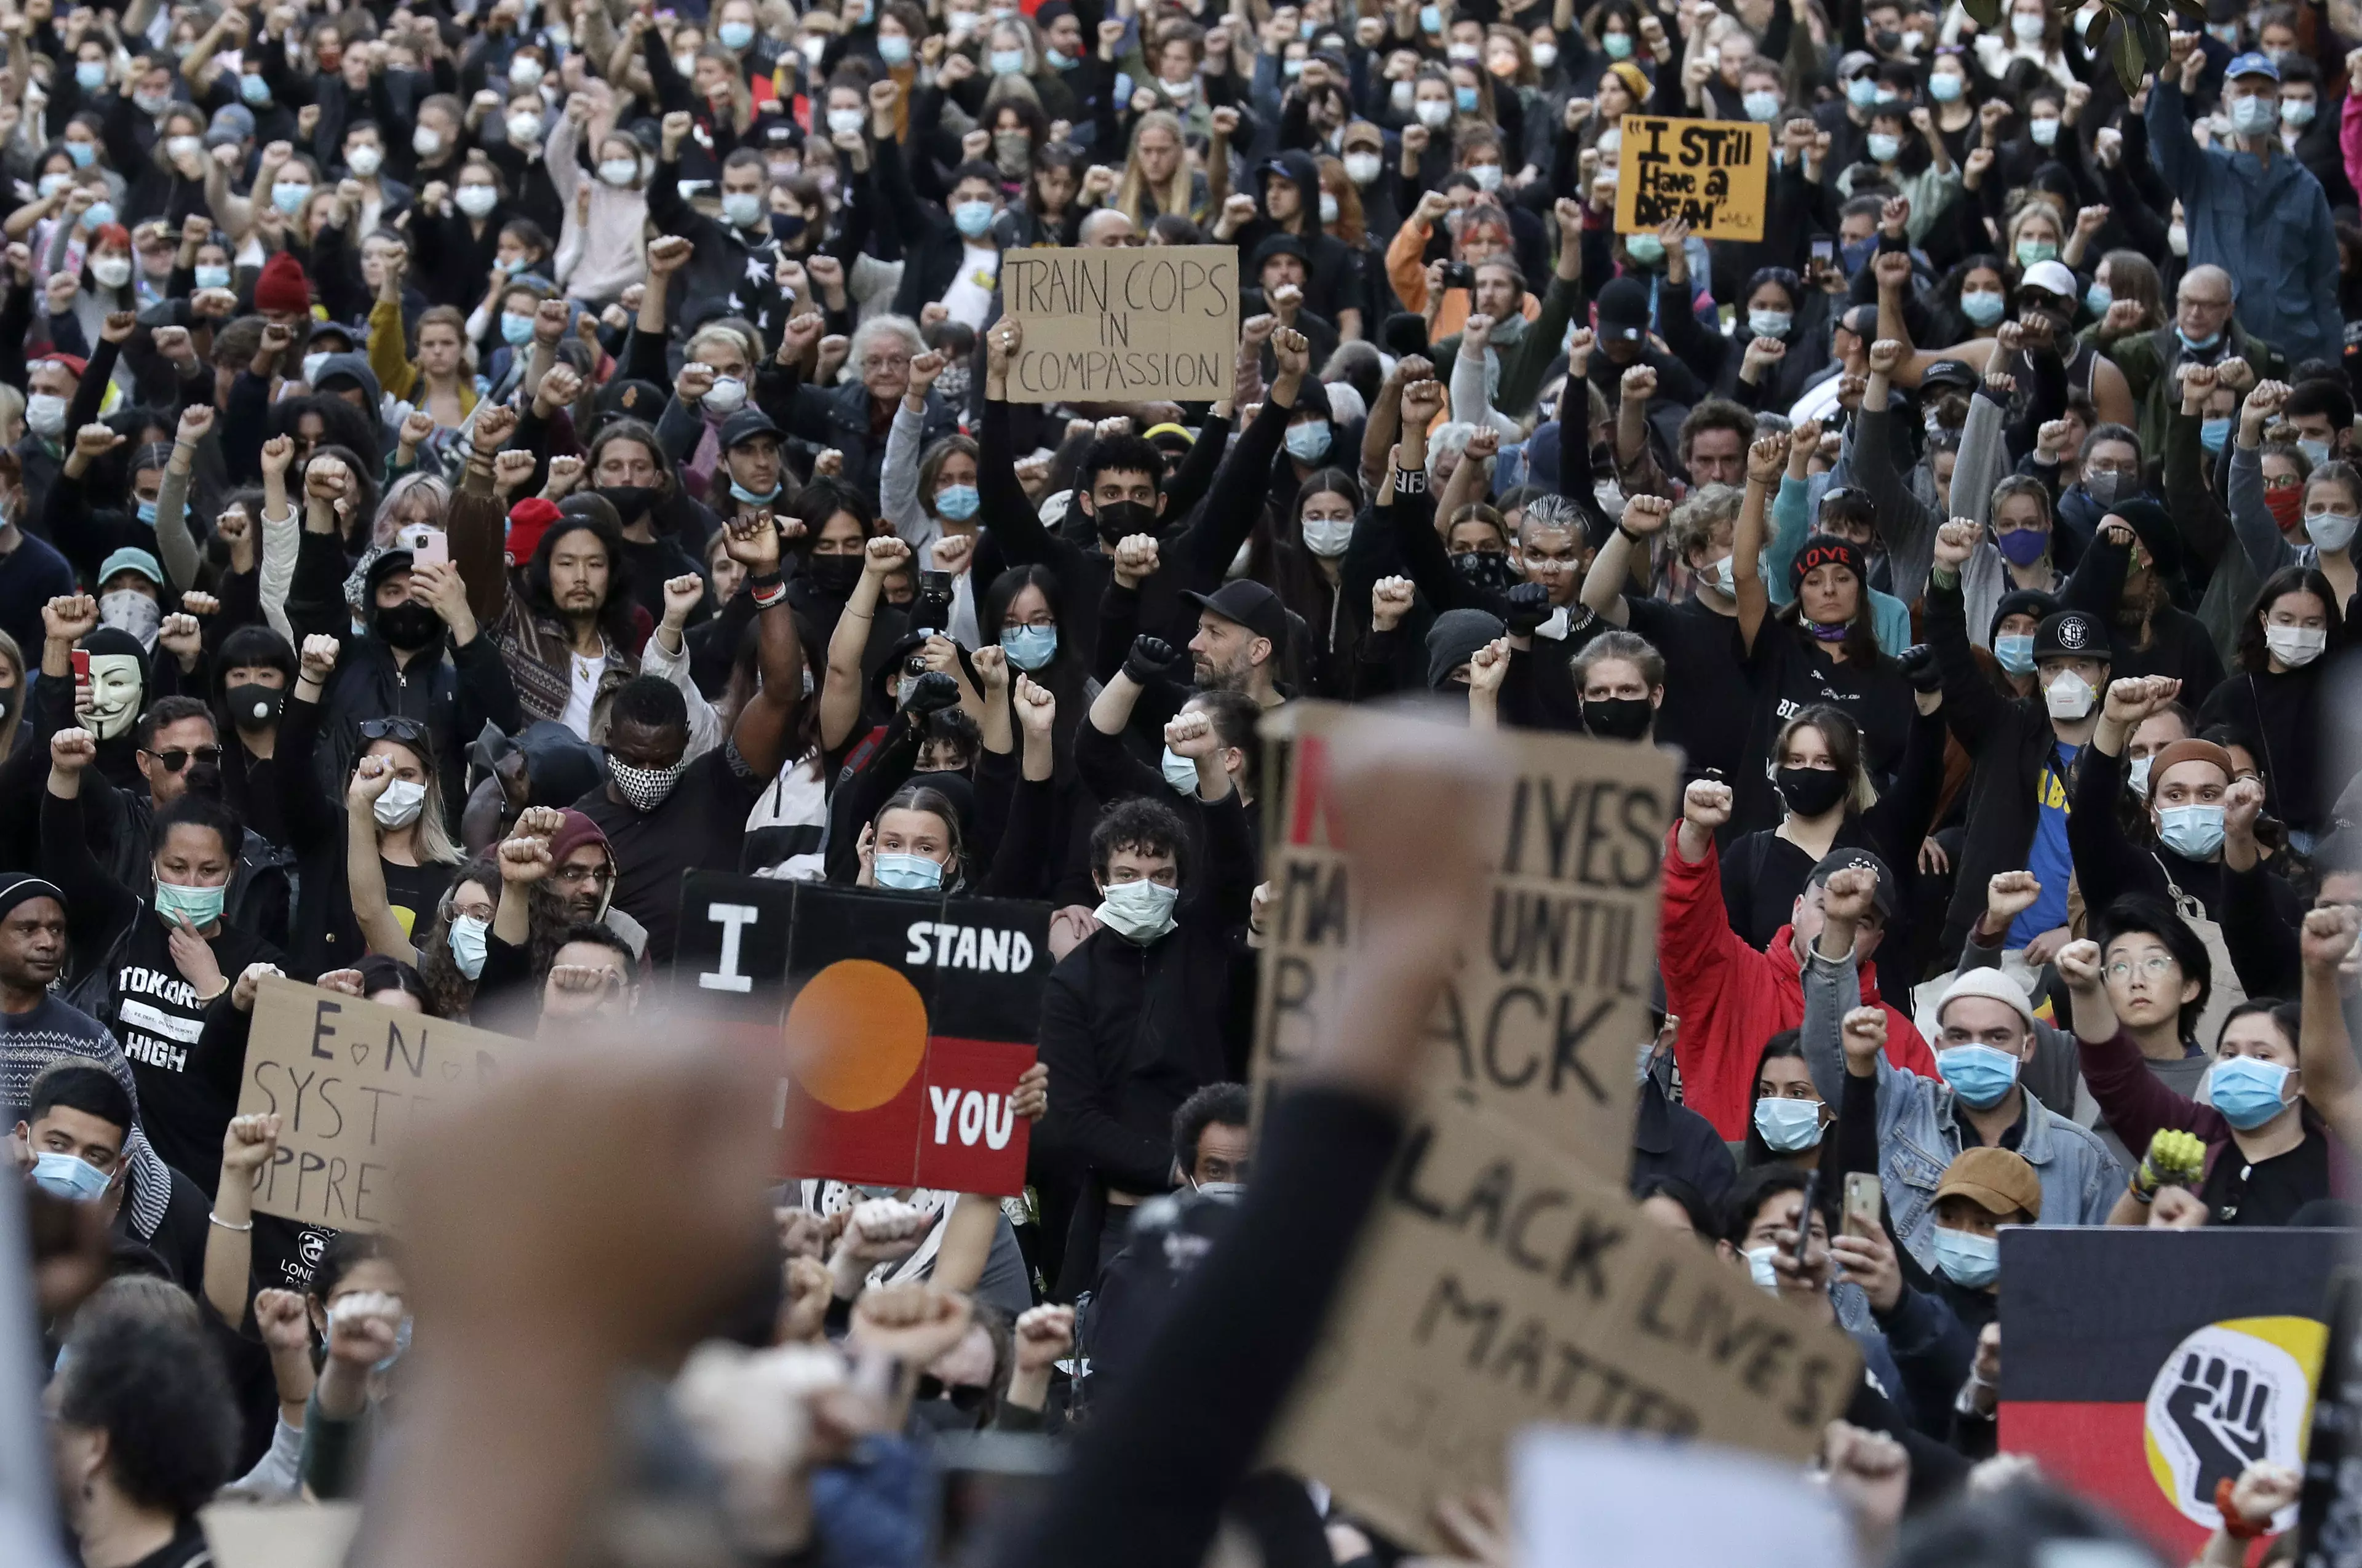 Photos Show Incredible Number Of People At Black Lives Matter Protests Across The Globe 